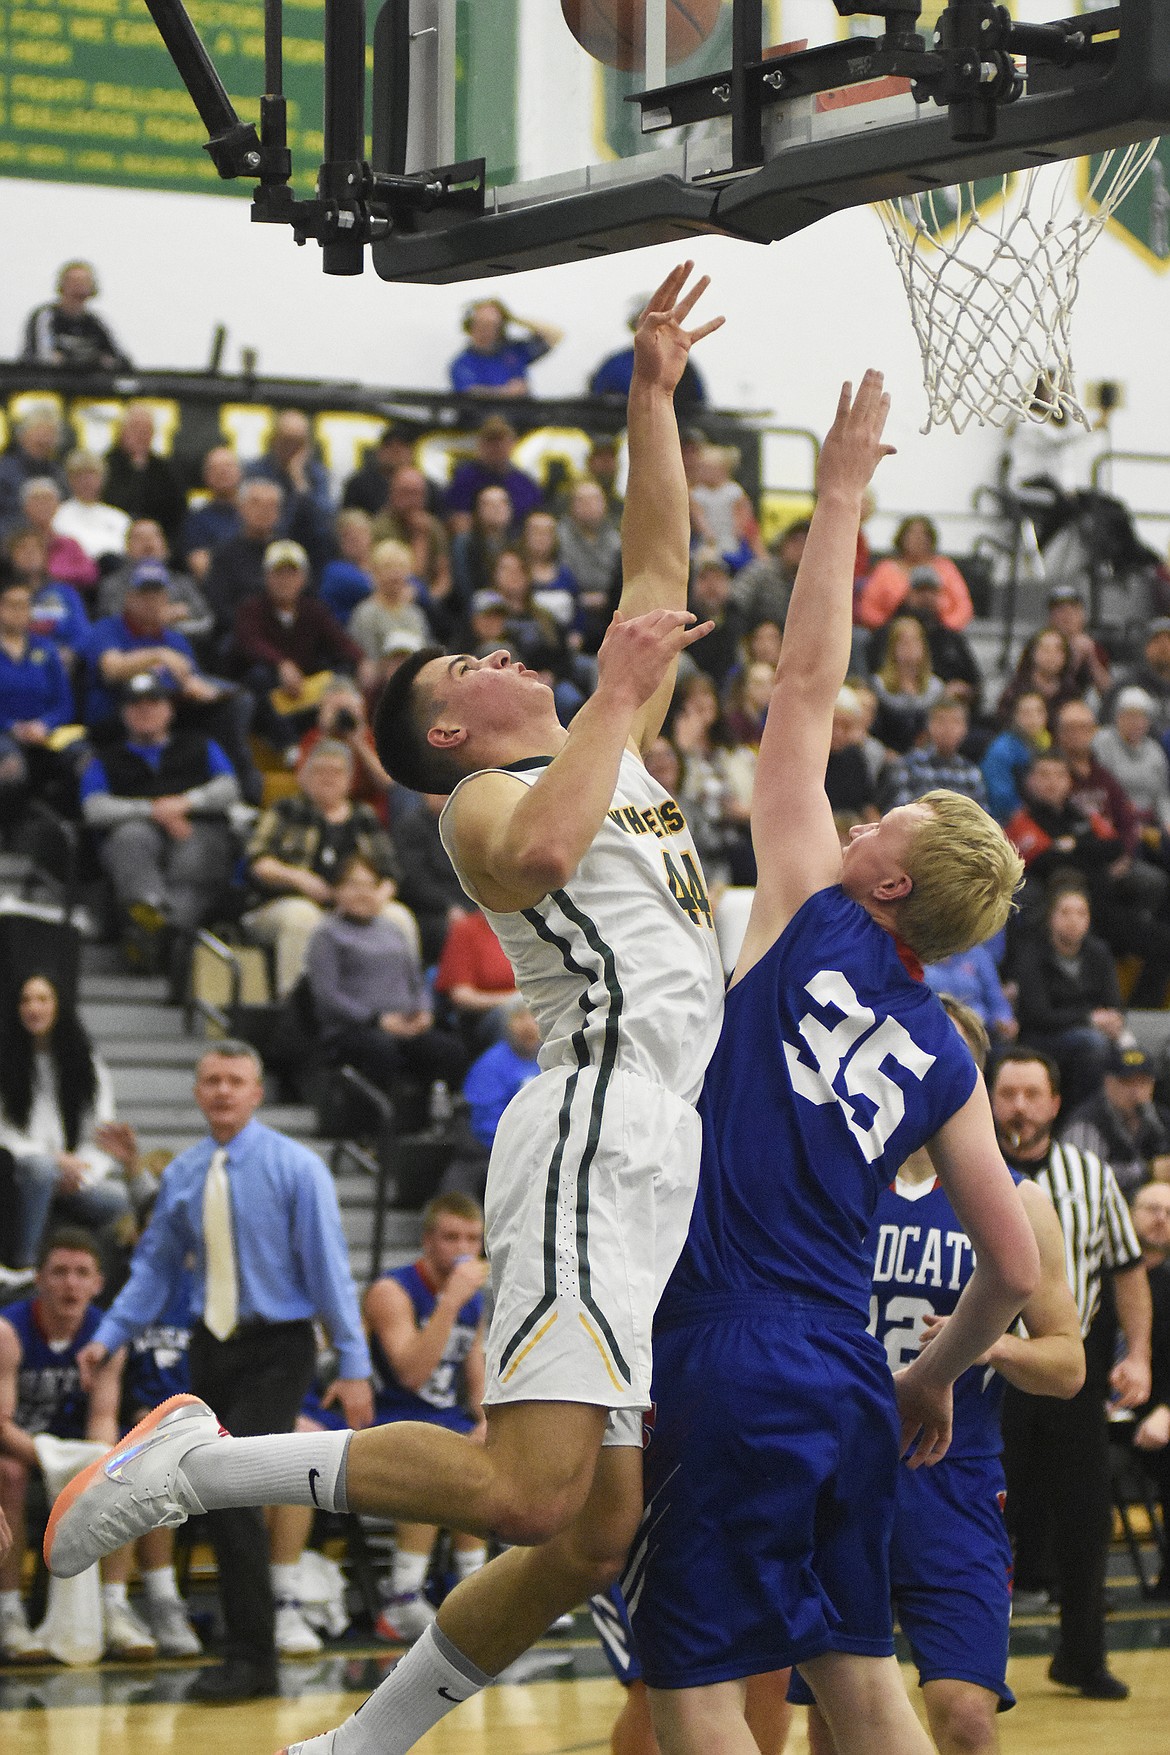 Lee Walburn fights through the contact during the Bulldogs&#146; 60-45 win over Columbia Falls on Thursday. (Daniel McKay/Whitefish Pilot)